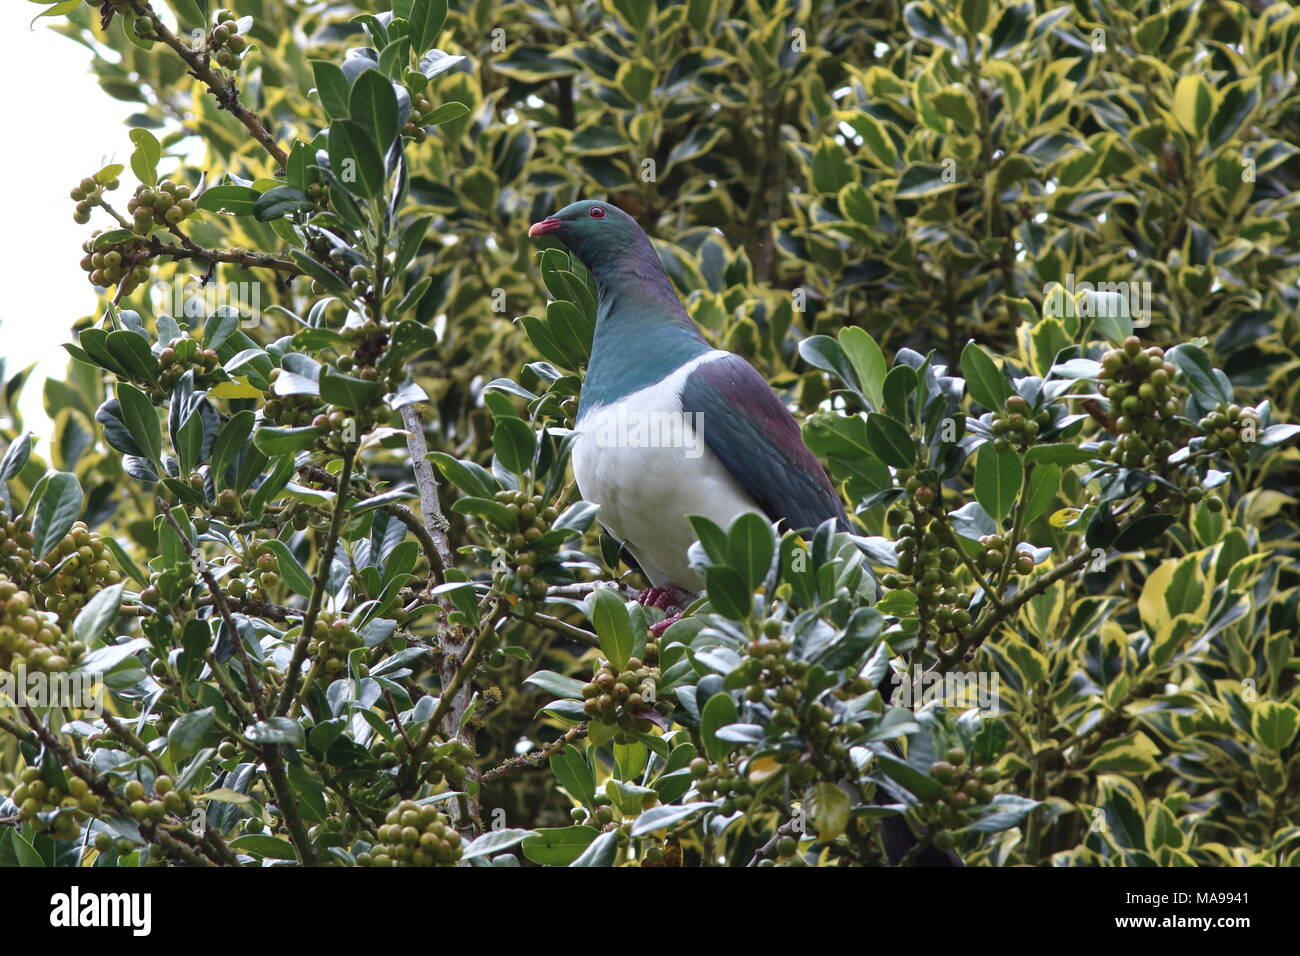 Hemiphaga novaeseelandiae, NZ Wood Pigeon an arboreal fruit pigeon, a native endemic bird known by the locals as a kokopa, here in a tree with berries Stock Photo